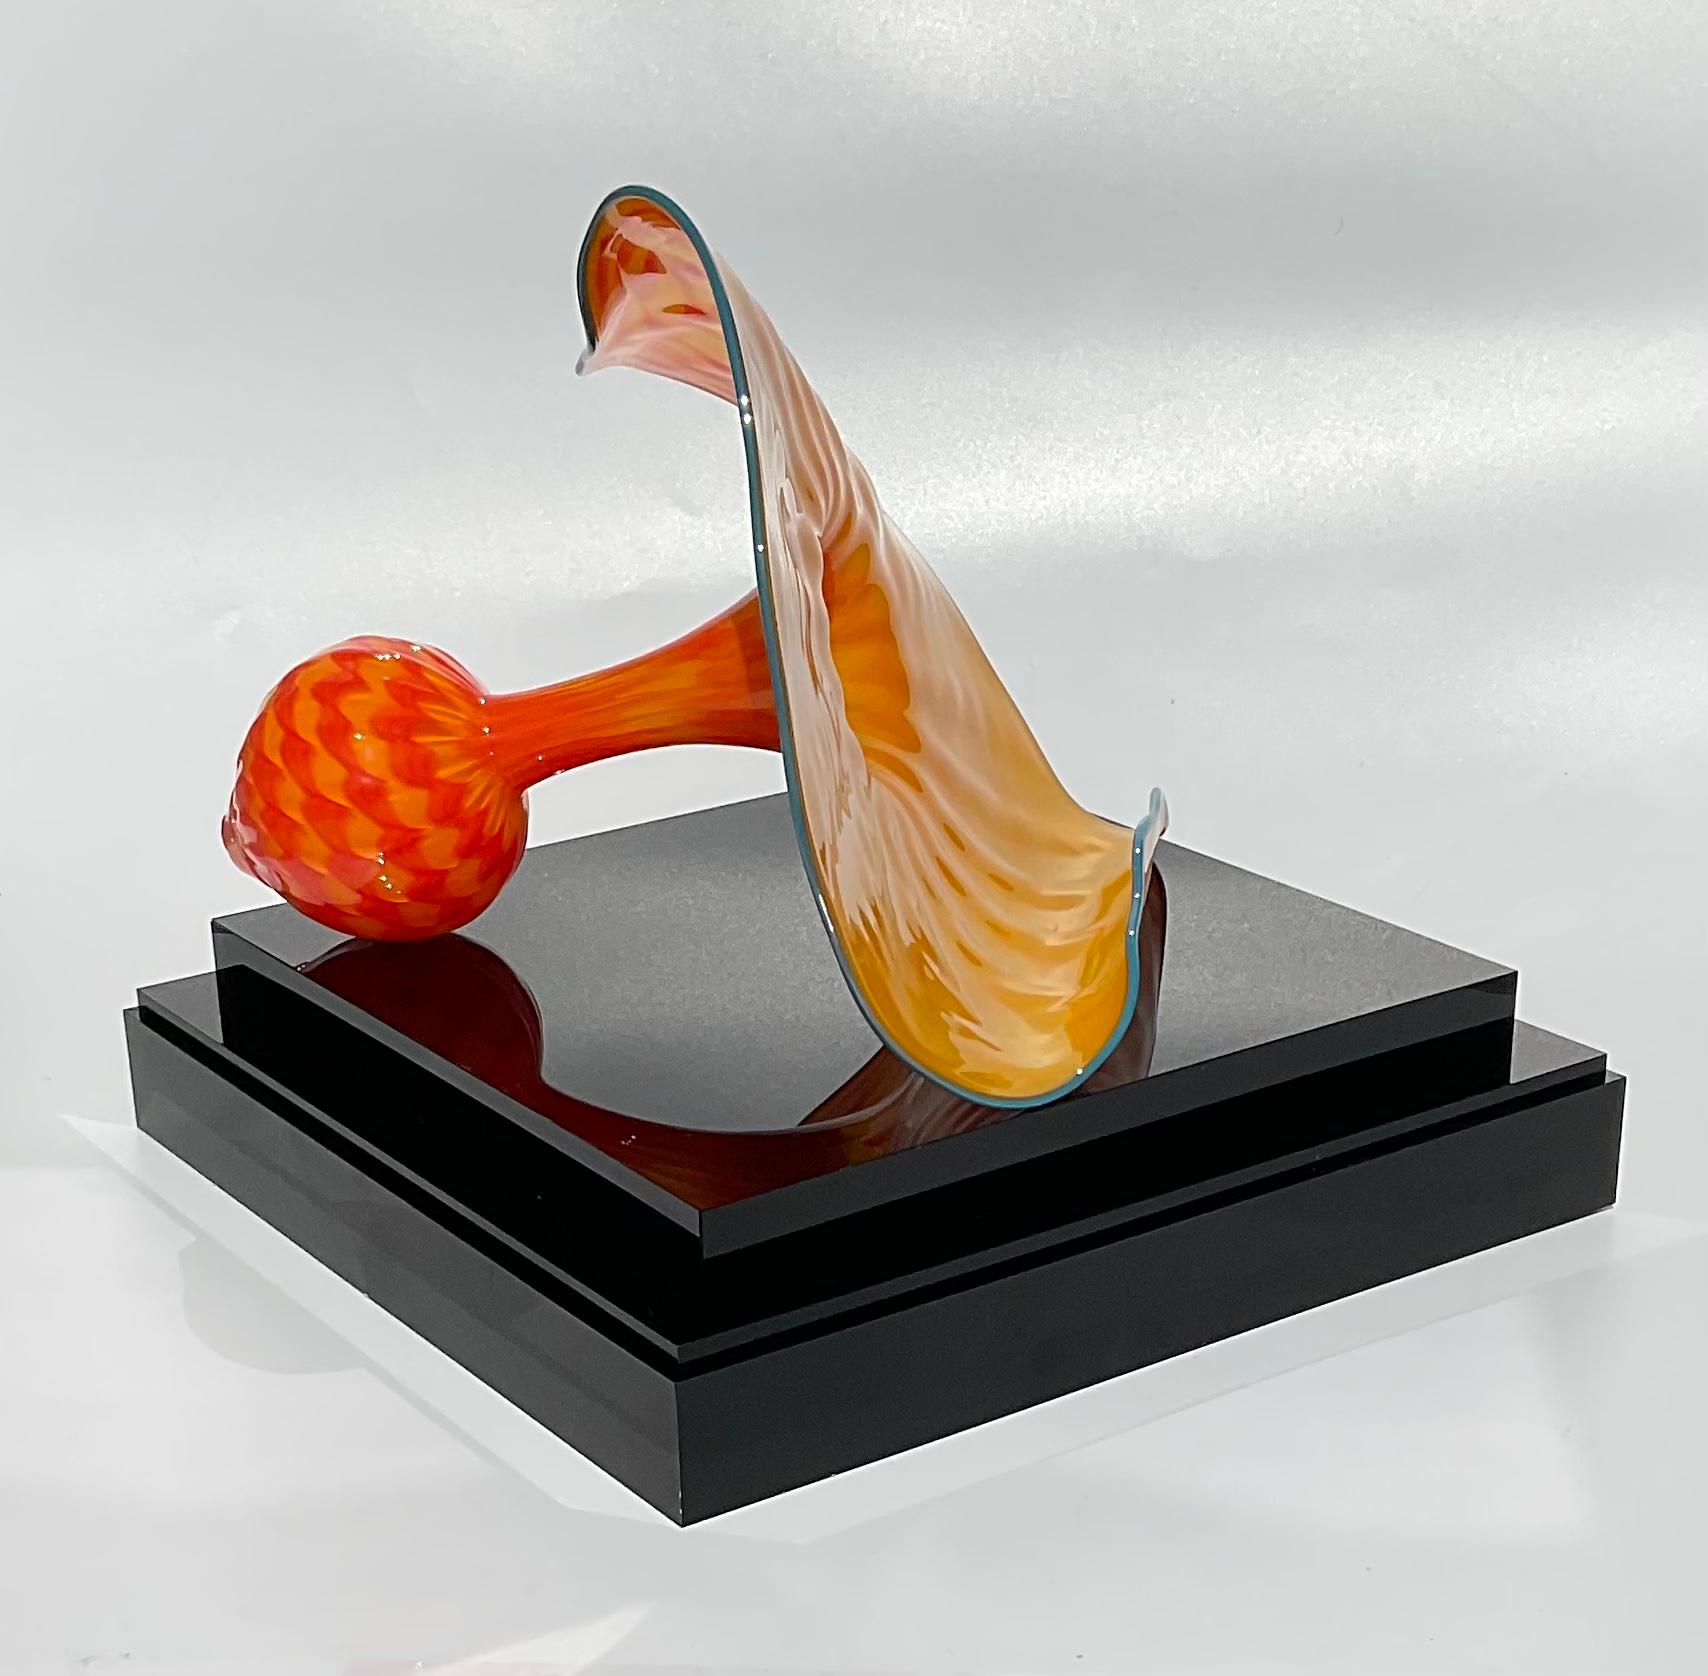 North American Dale Chihuly Chihuly Studios Merigold Persian Art Glass Sculpture, 2014